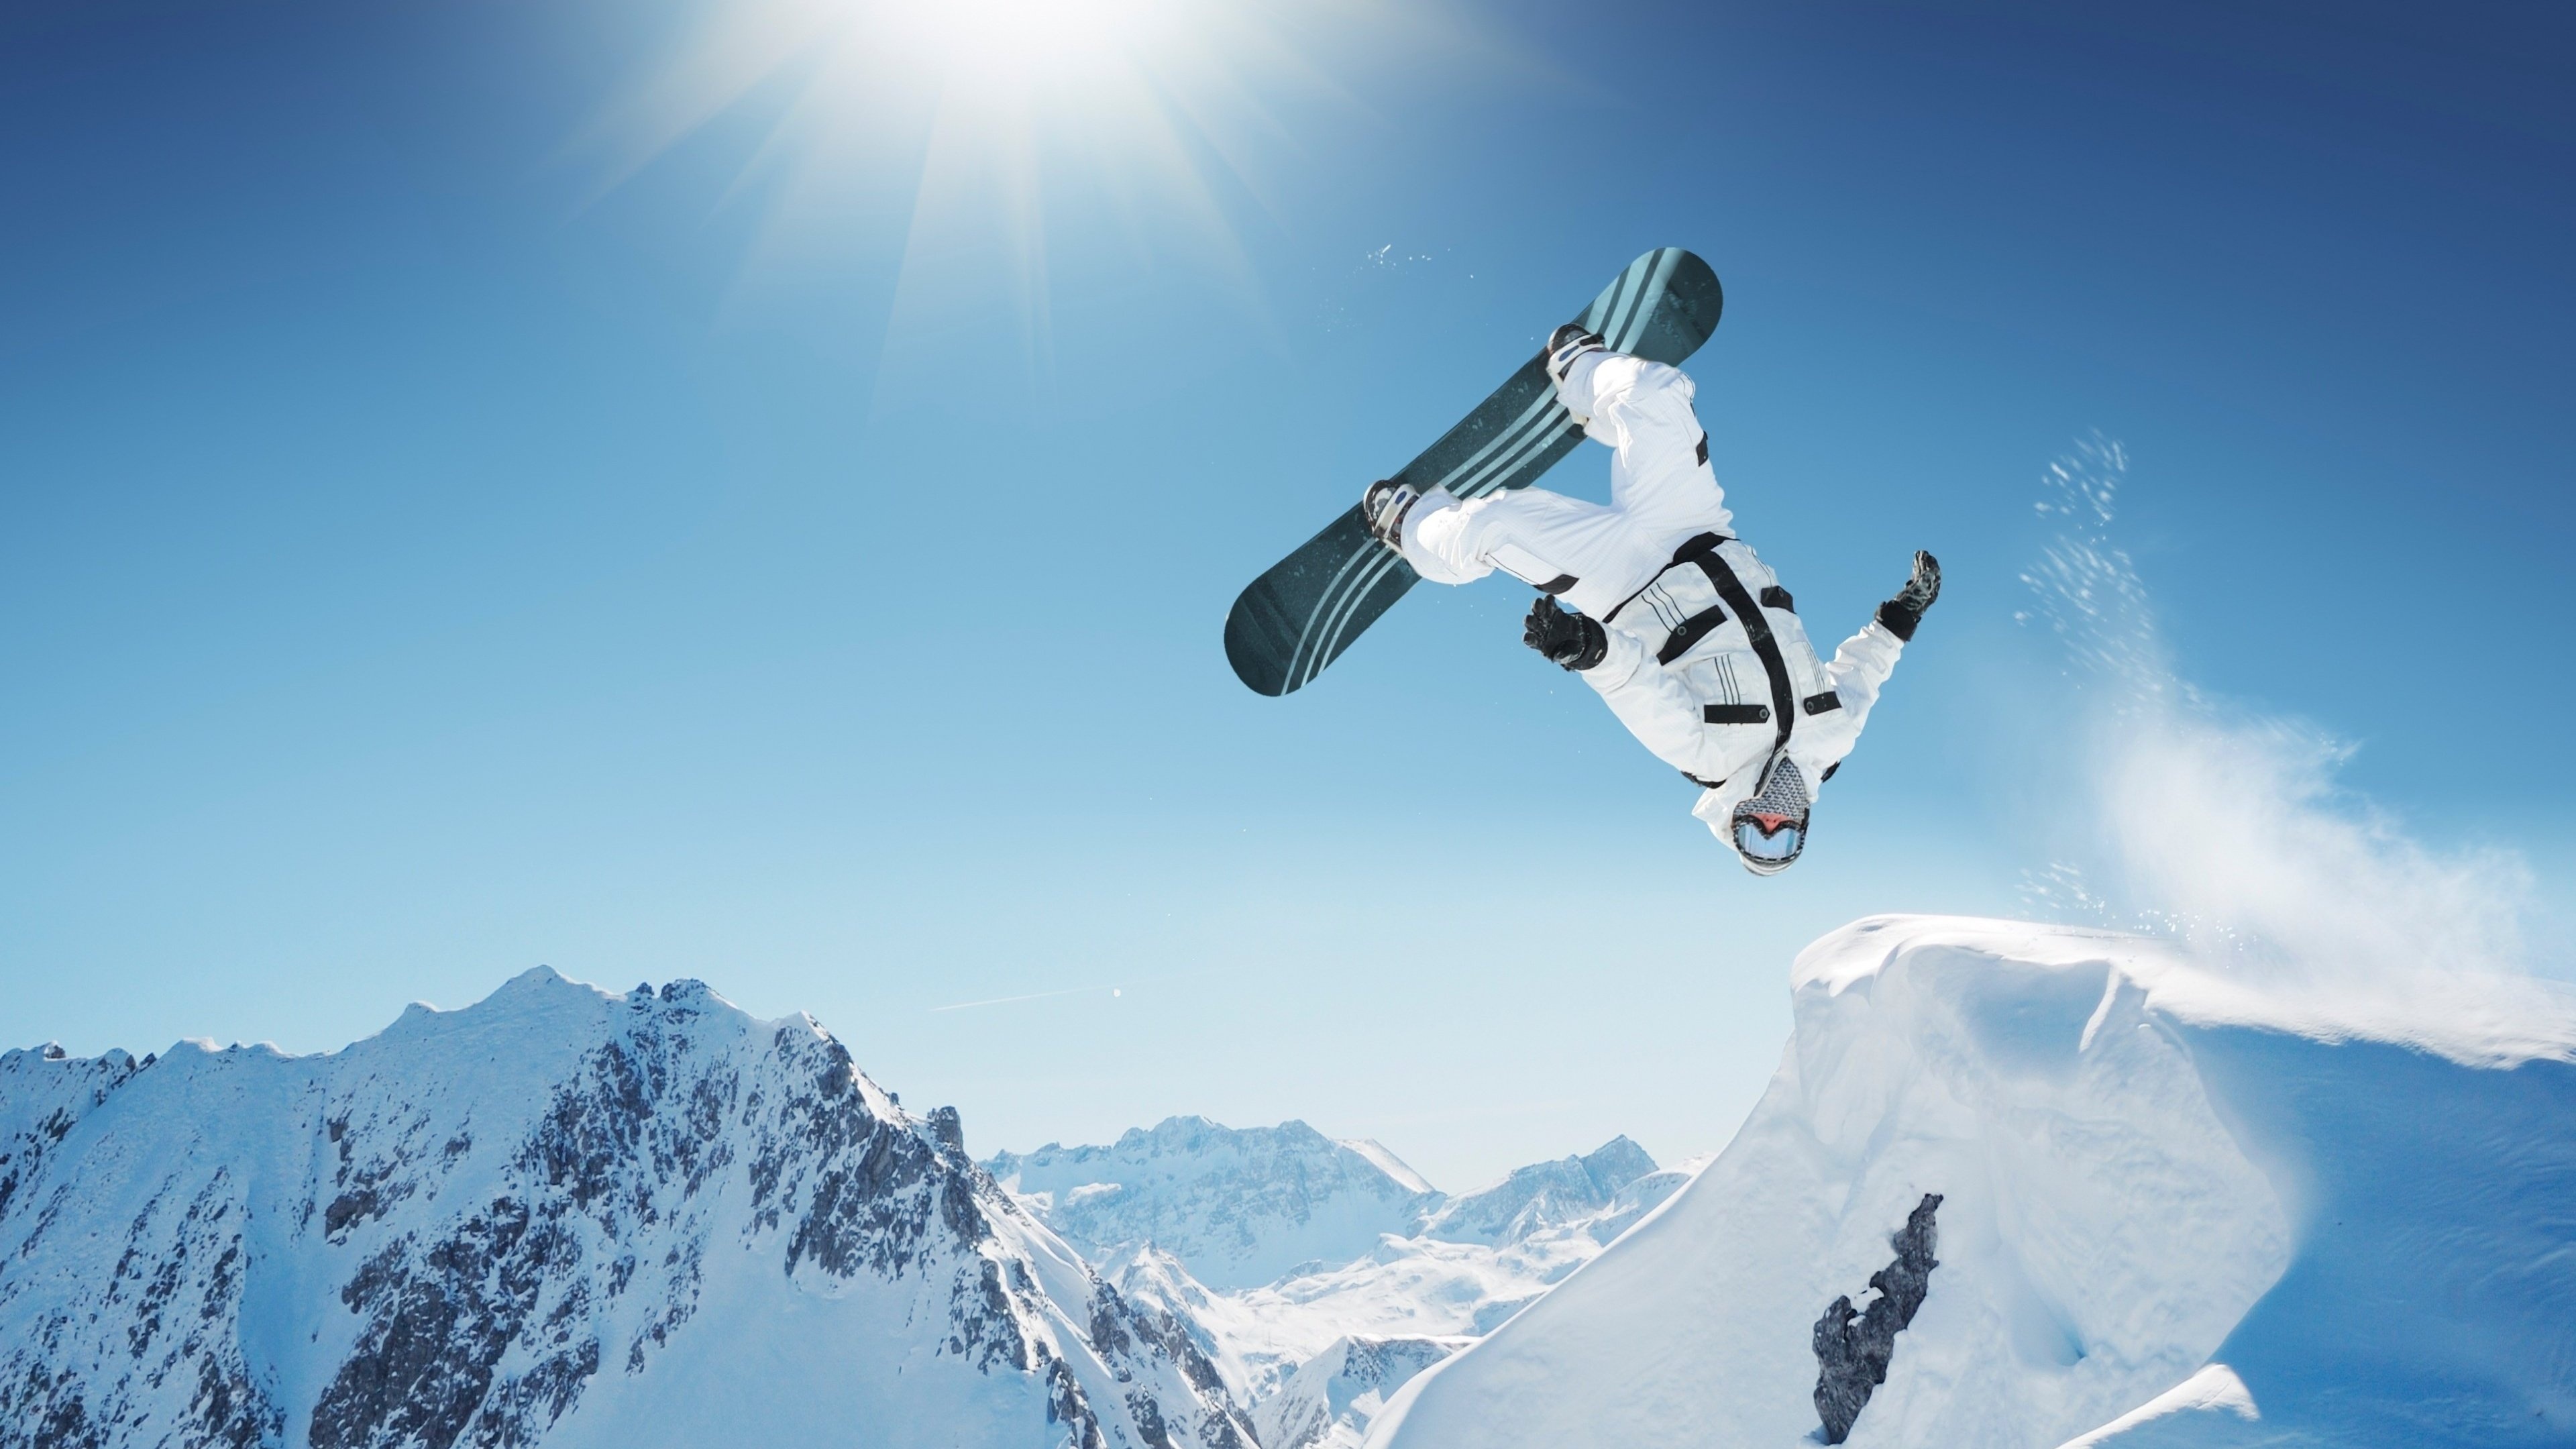 Snowboarding: Big air style in the mountains, High-injury-risk winter sports discipline. 3840x2160 4K Background.